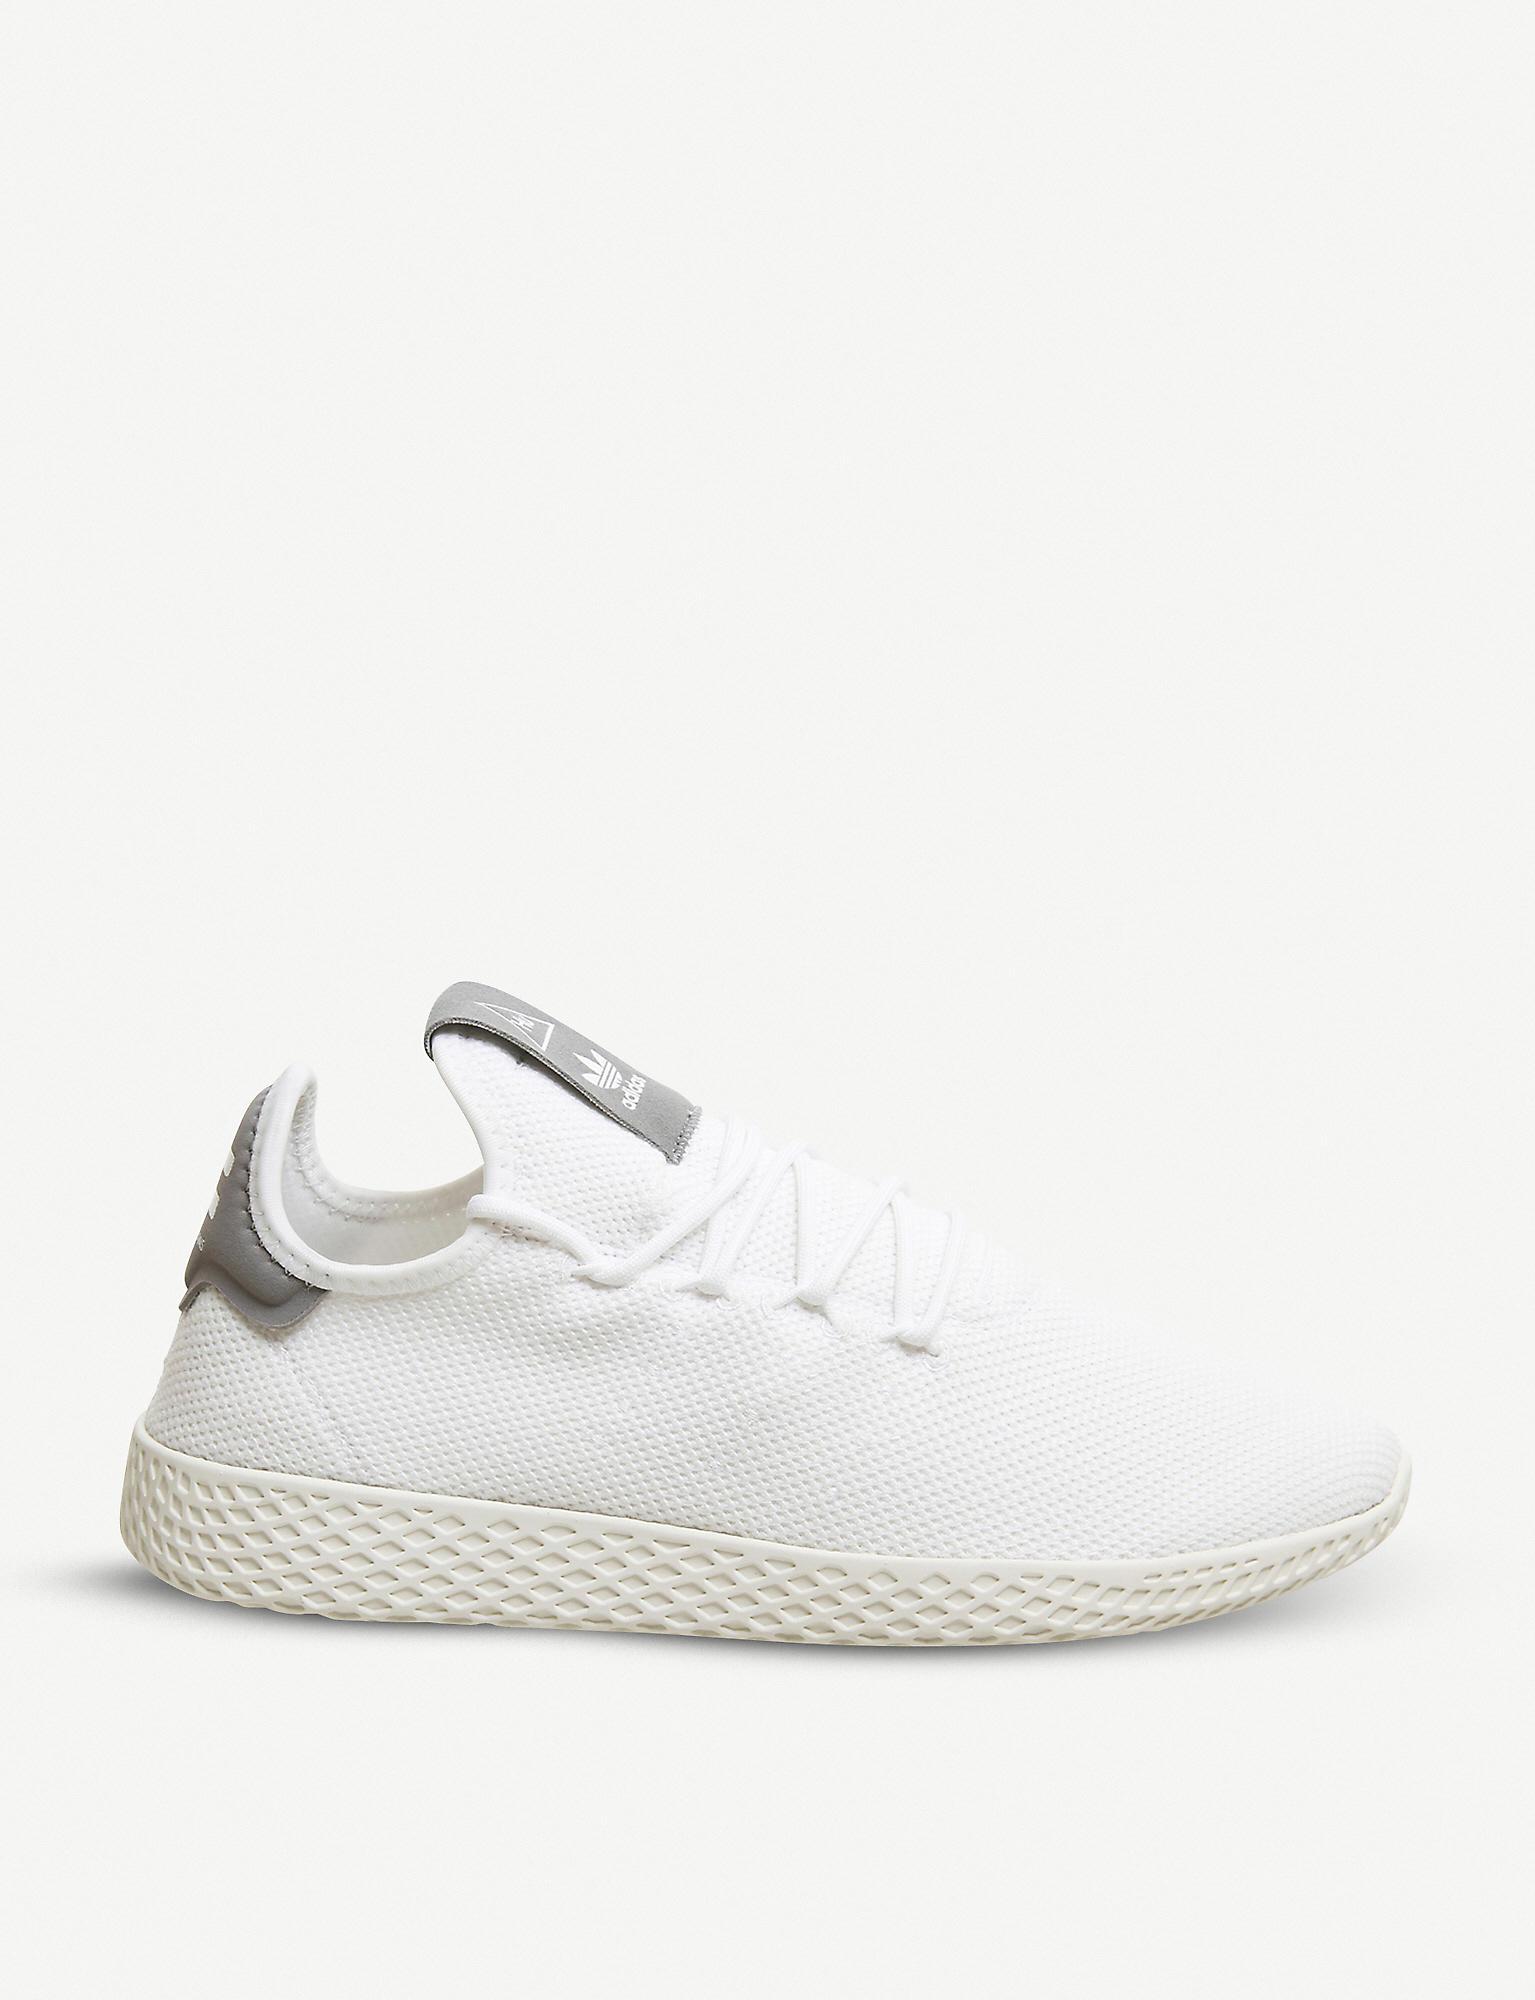 adidas Lace Pharrell Williams Tennis Hu Shoes in White Grey (White) | Lyst